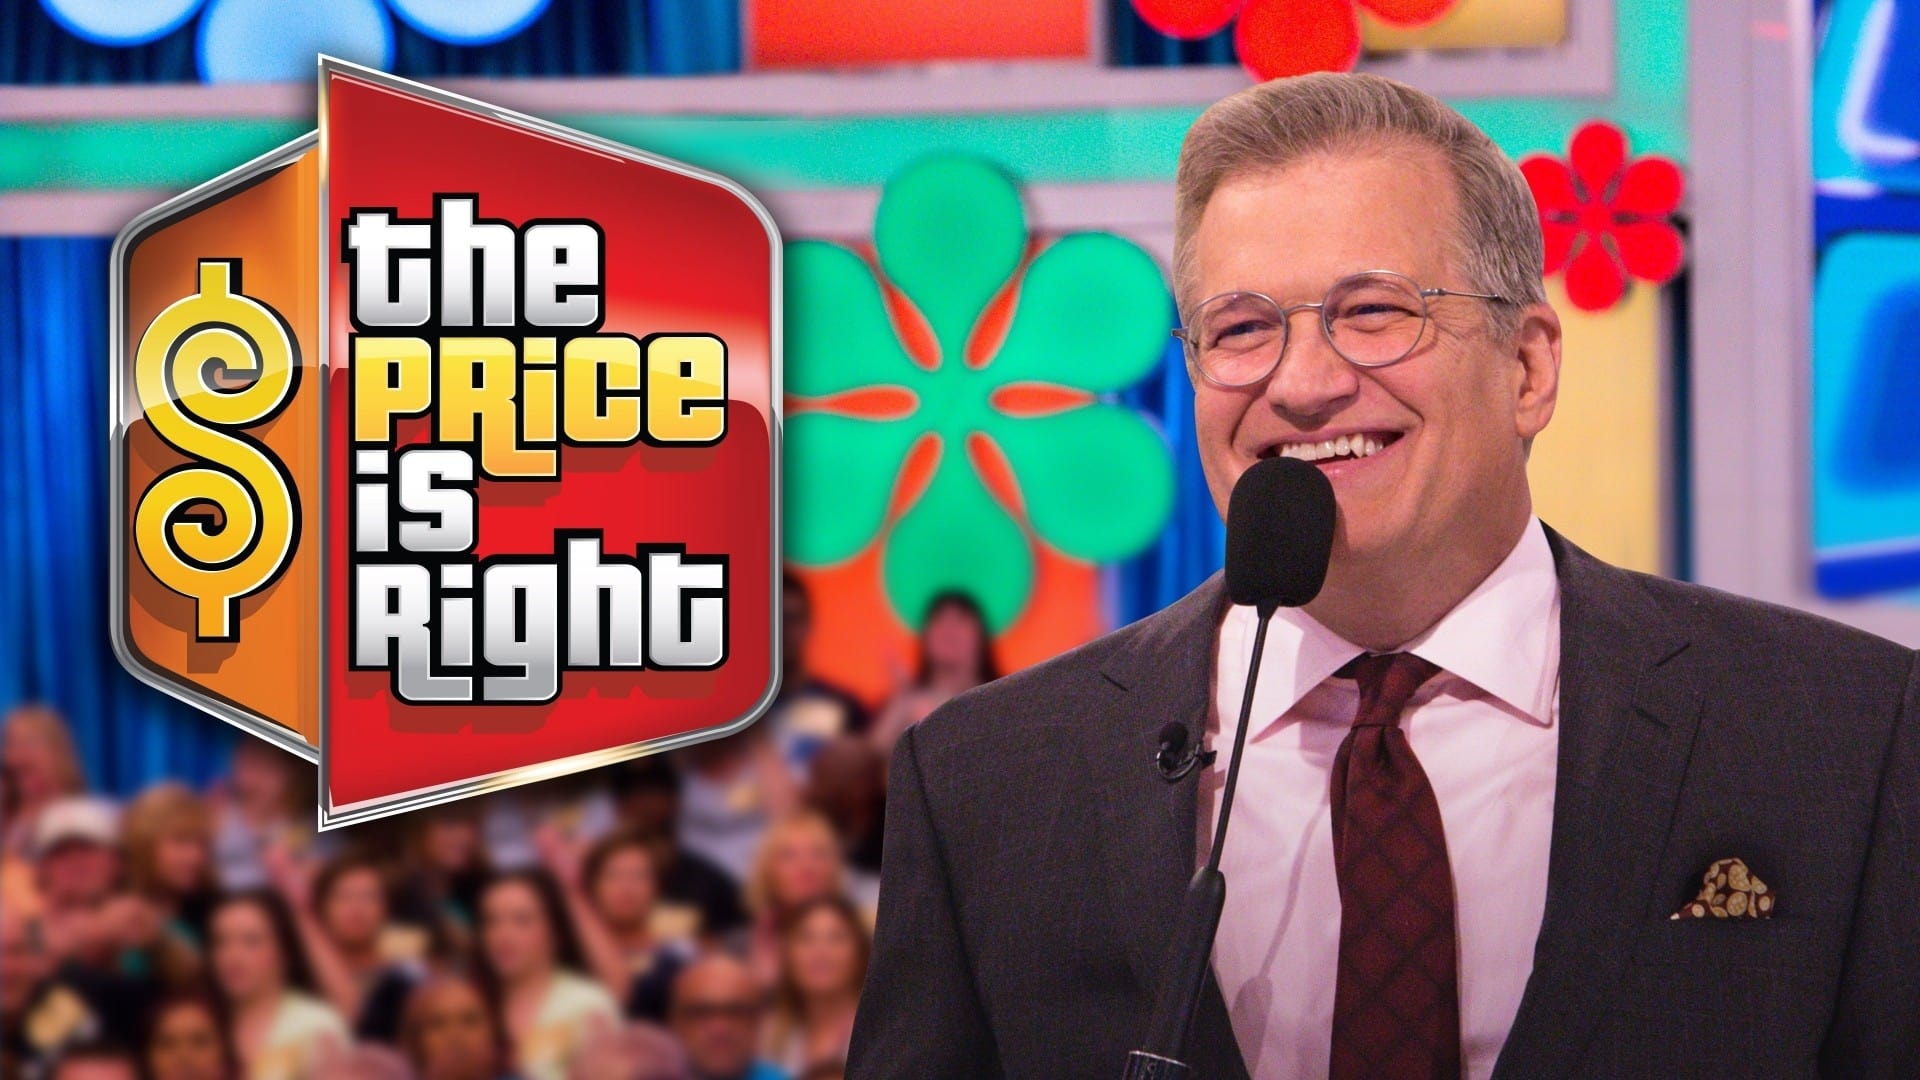 The Price Is Right - Season 3 Episode 234 : The Price Is Right Season 3 Episode 234